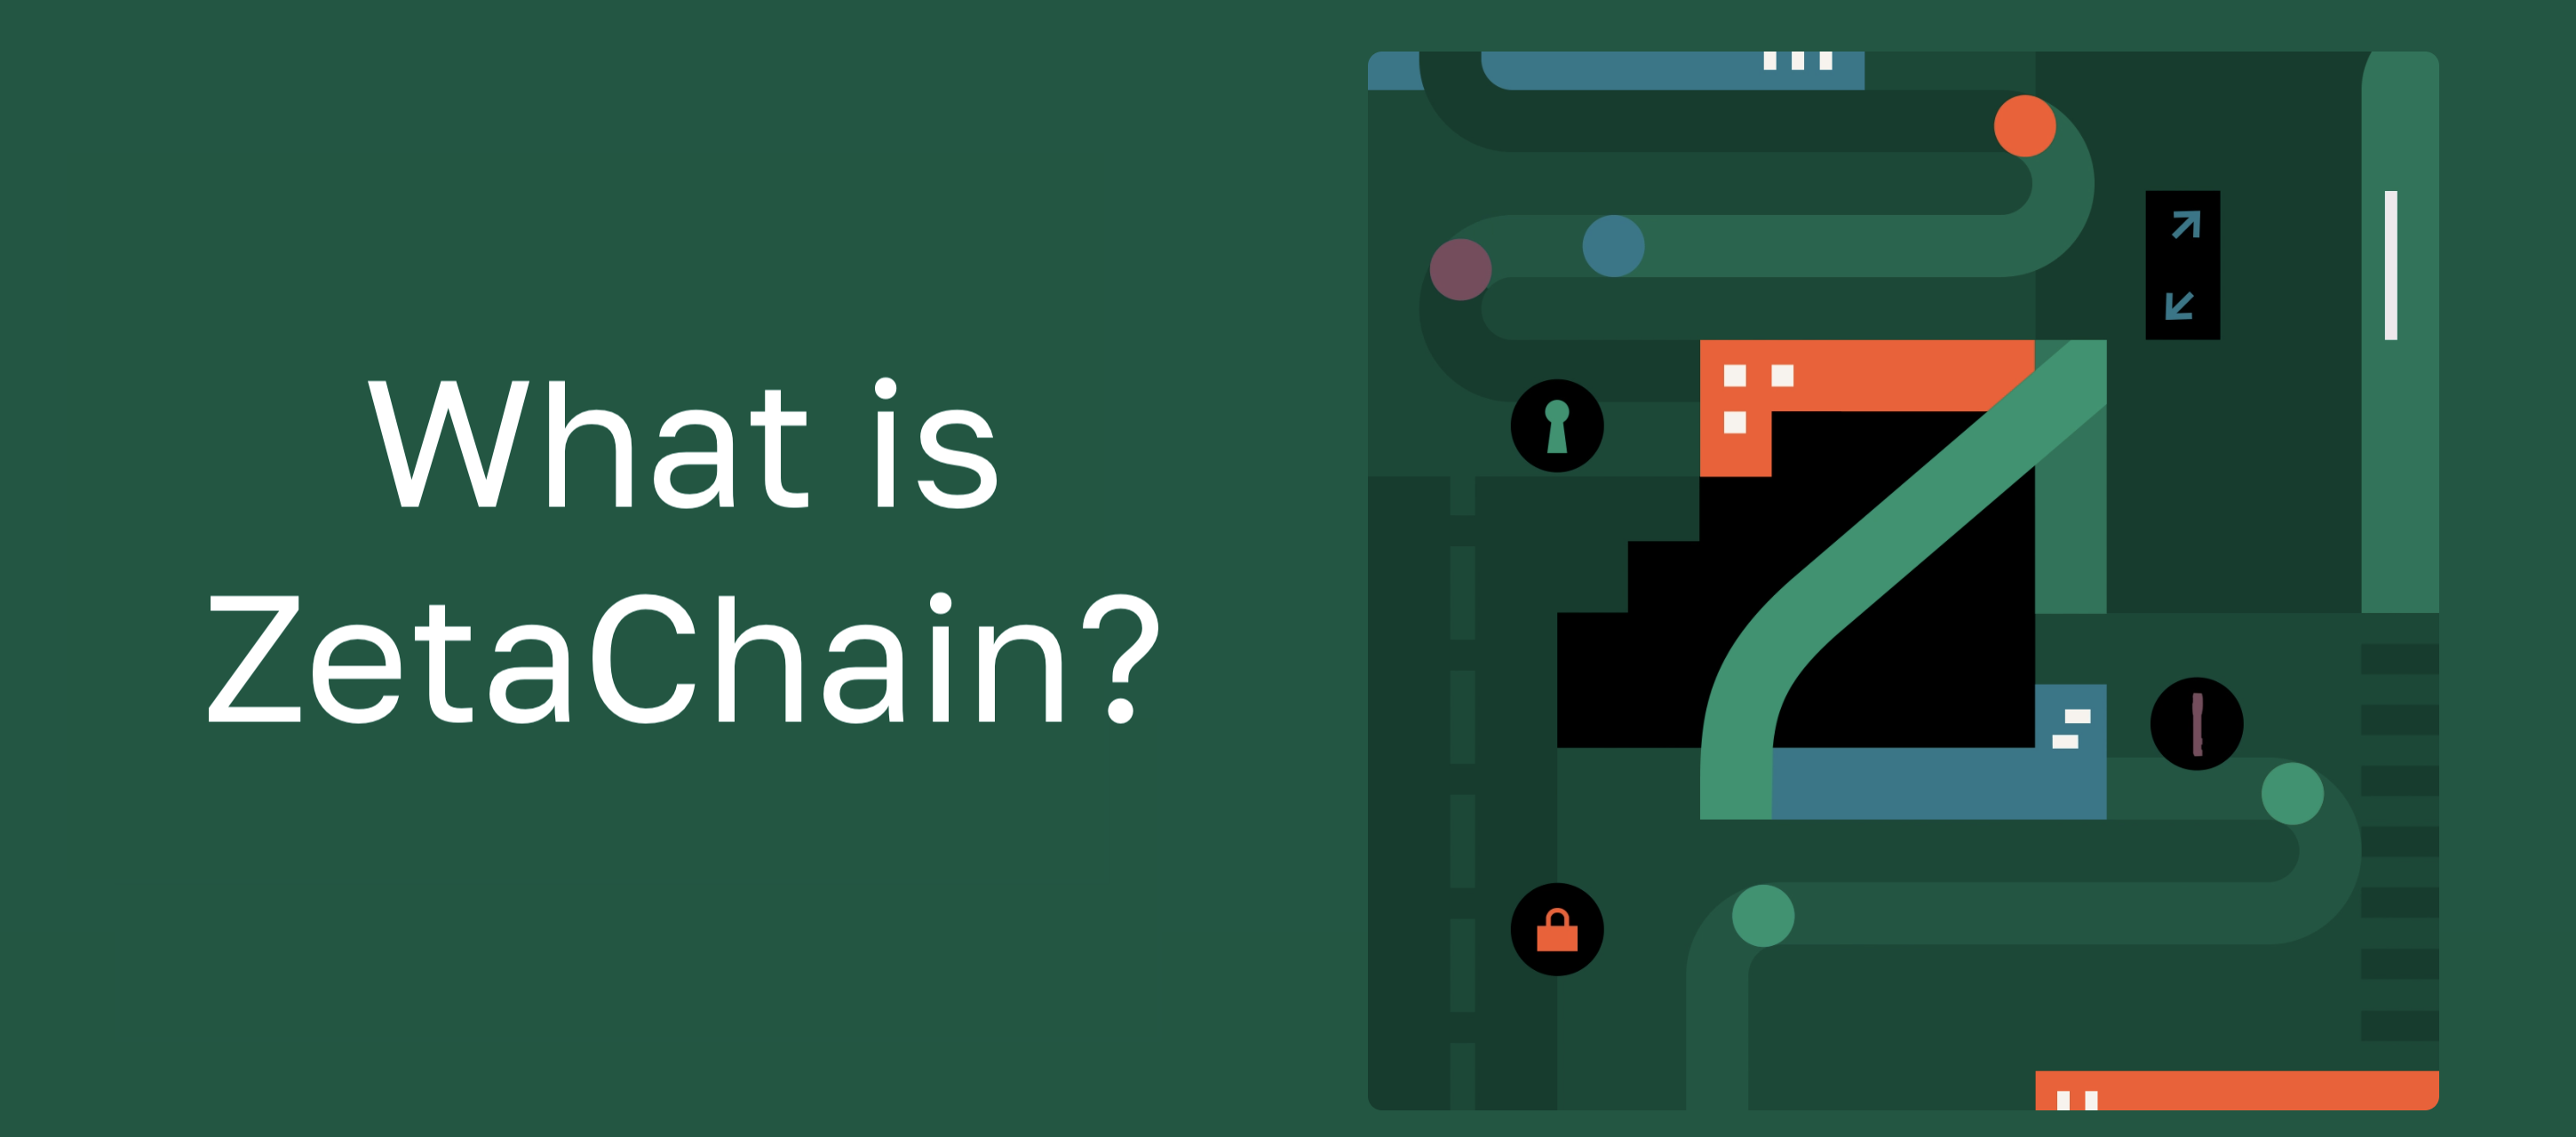 Text on green background: "What is ZetaChain?"